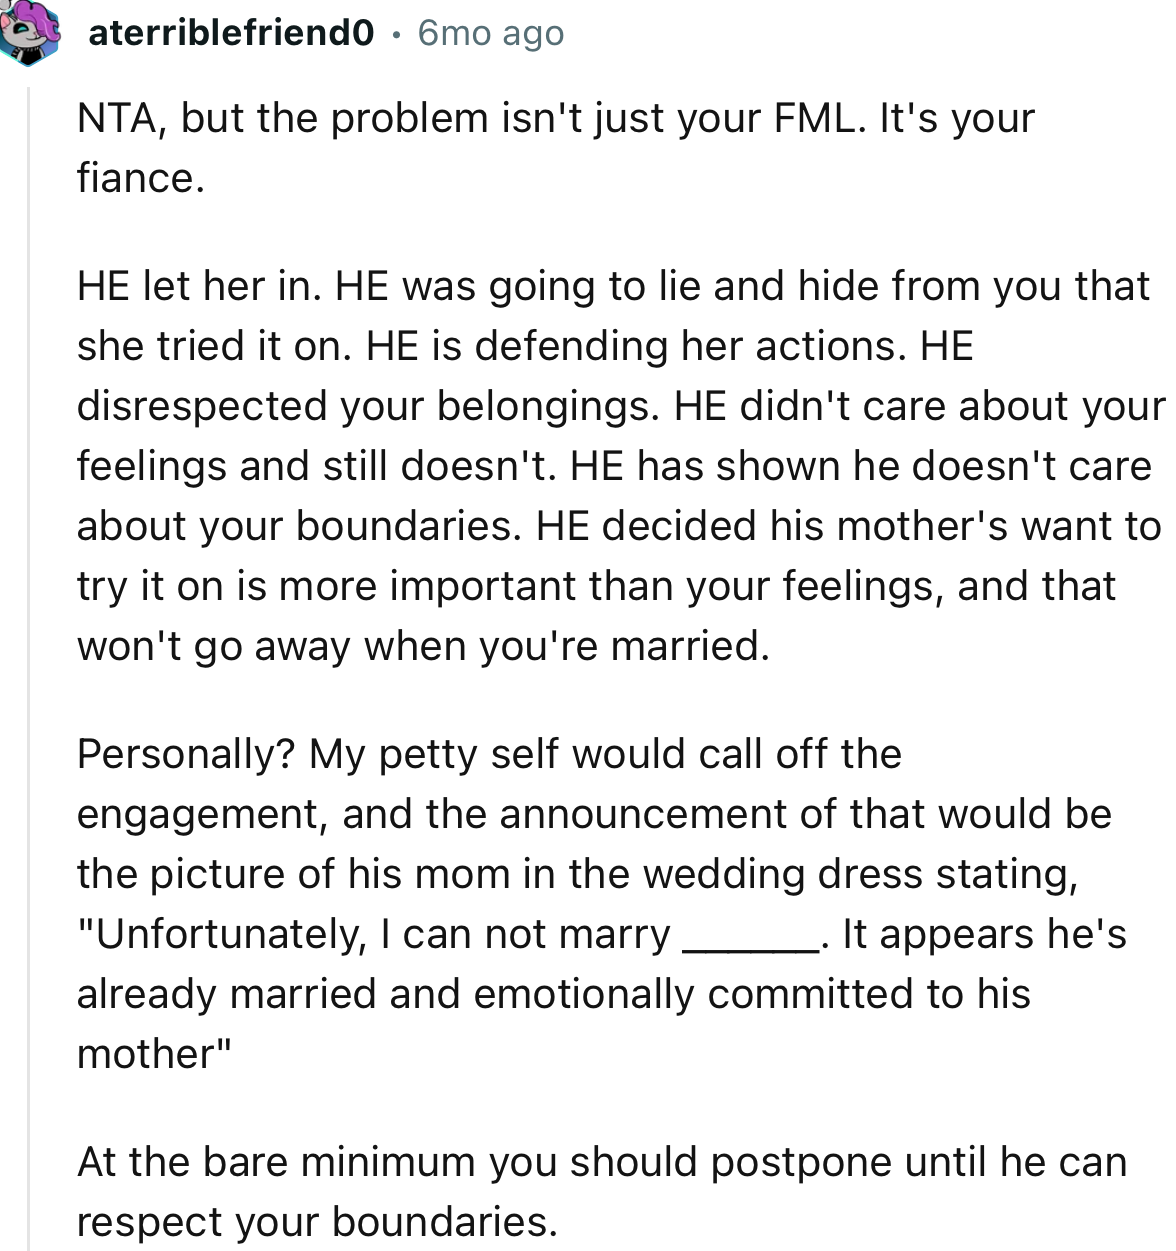 “NTA, but the problem isn't just your FML. It's your fiance.     HE let her in.”